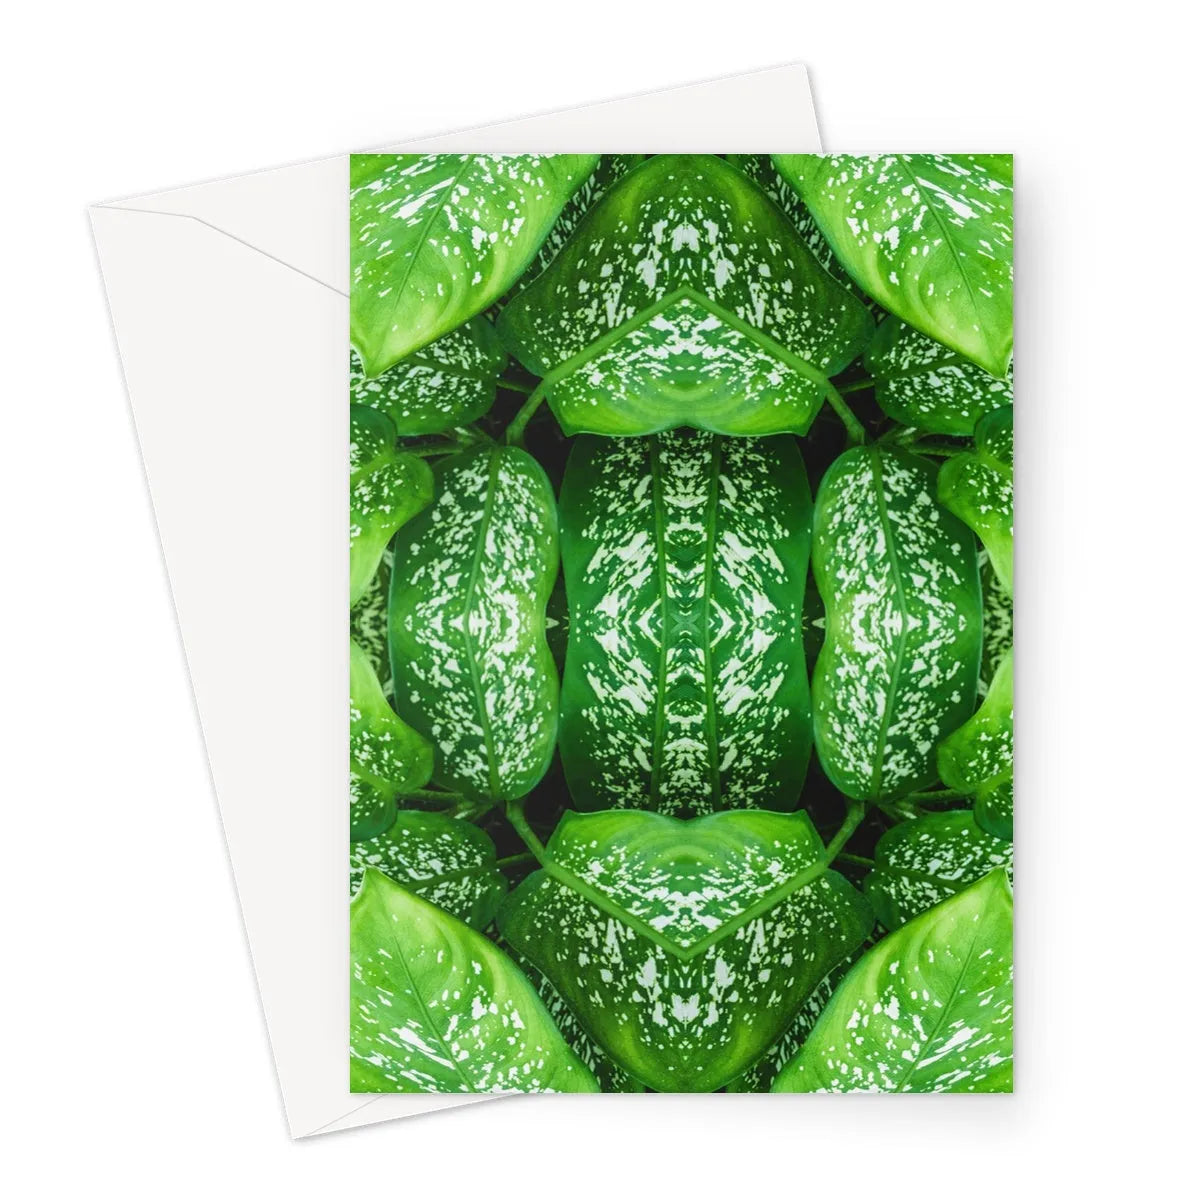 Pitter Splatter Greeting Card - A5 Portrait / 1 Card - Greeting & Note Cards - Aesthetic Art